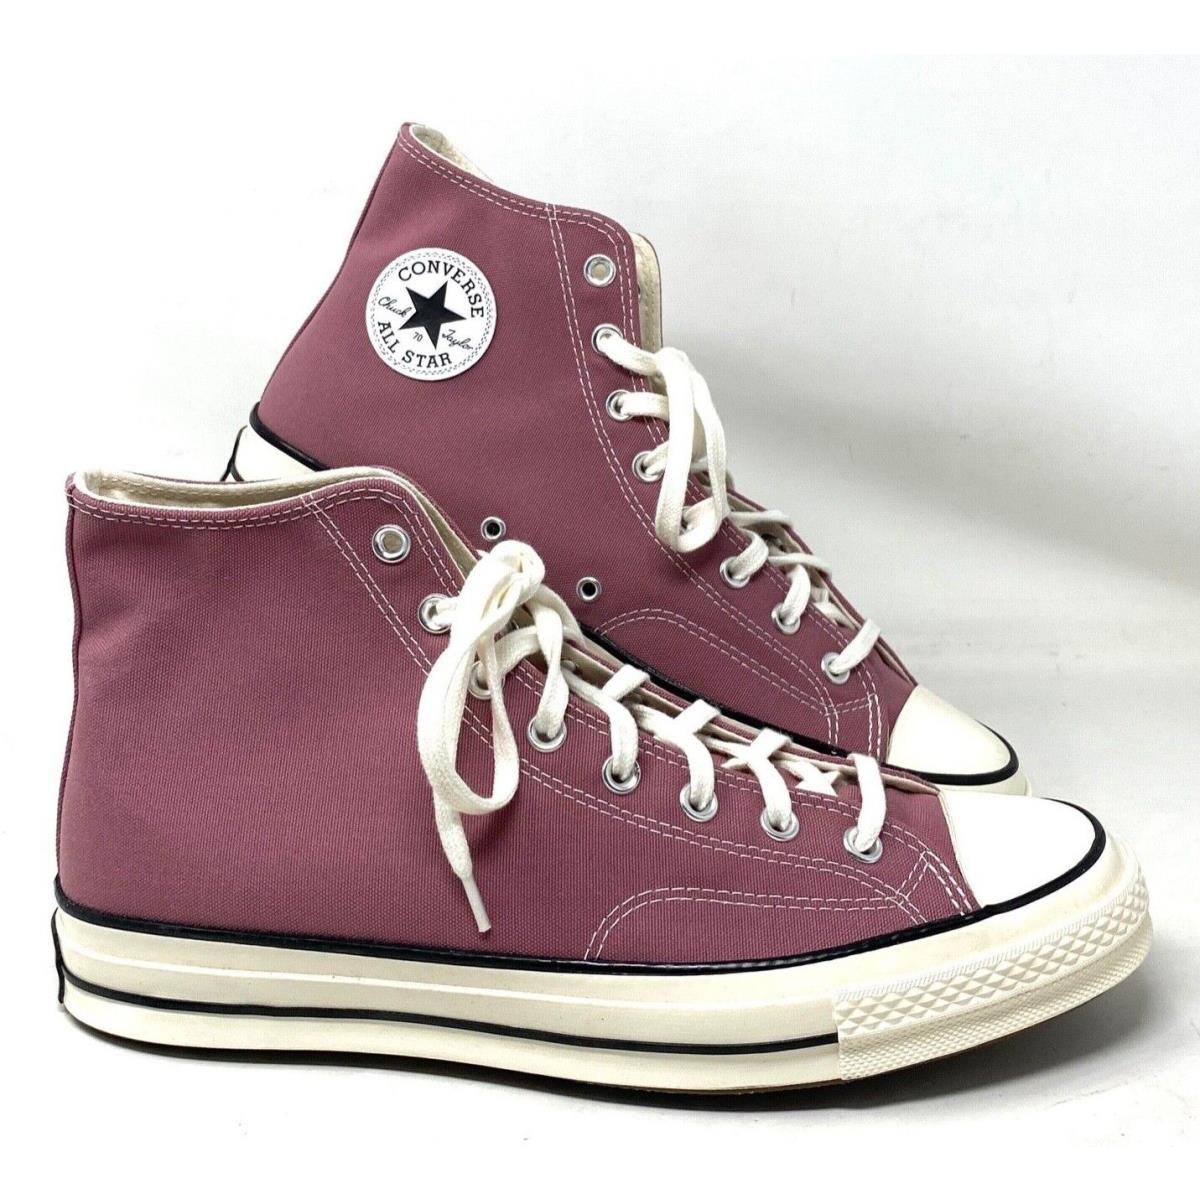 Converse Chuck 70 Sneakers High Top For Men Pink Aura Shoes Canvas Skate 172683C